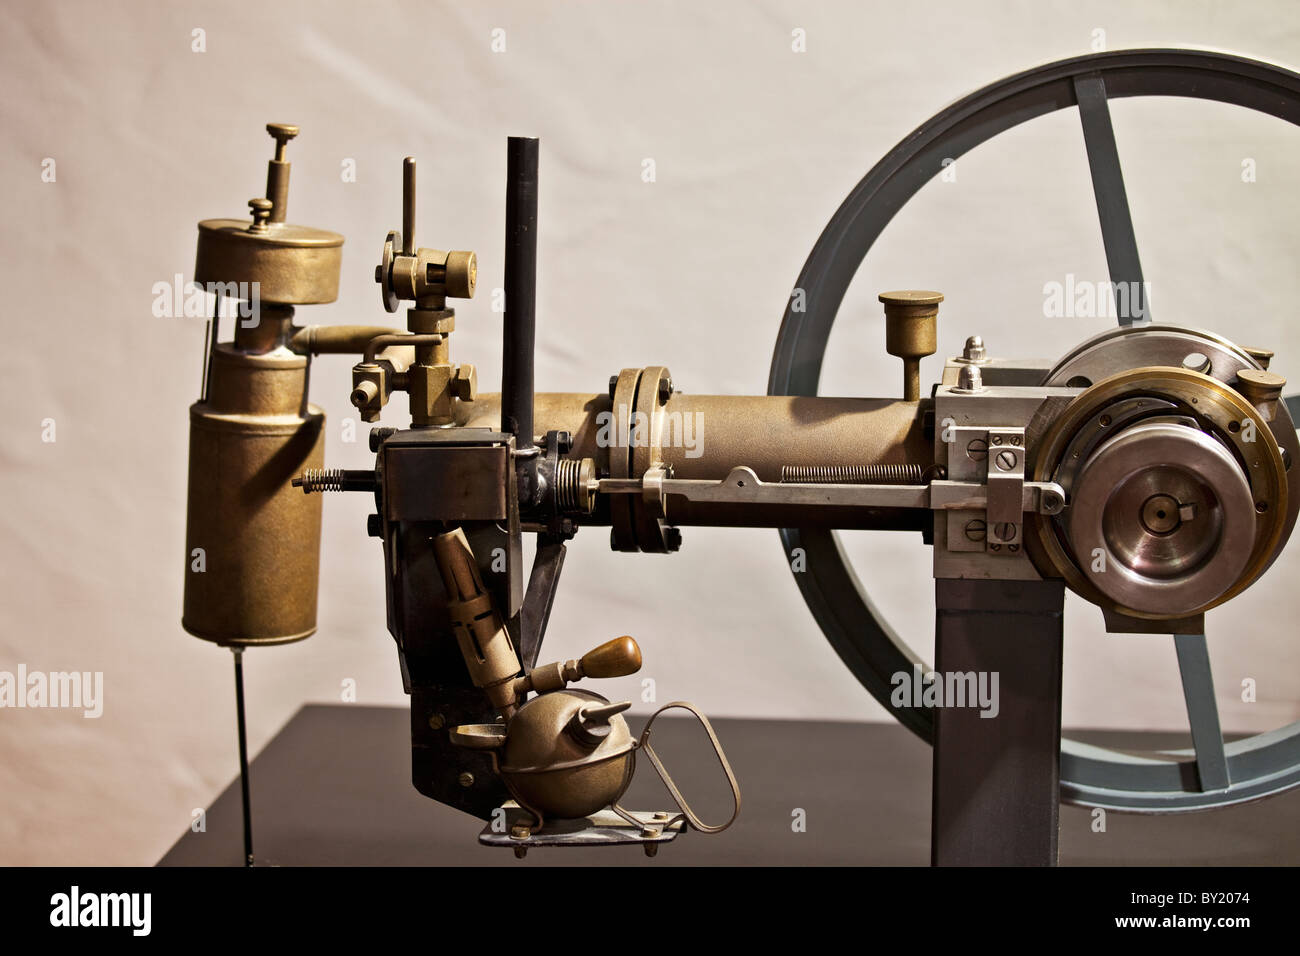 Germany, Saxony, Bad Cannstatt, Gottlieb Daimler Memorial, house where Daimler resided. Model of of the first vehicle combustion engine. Stock Photo